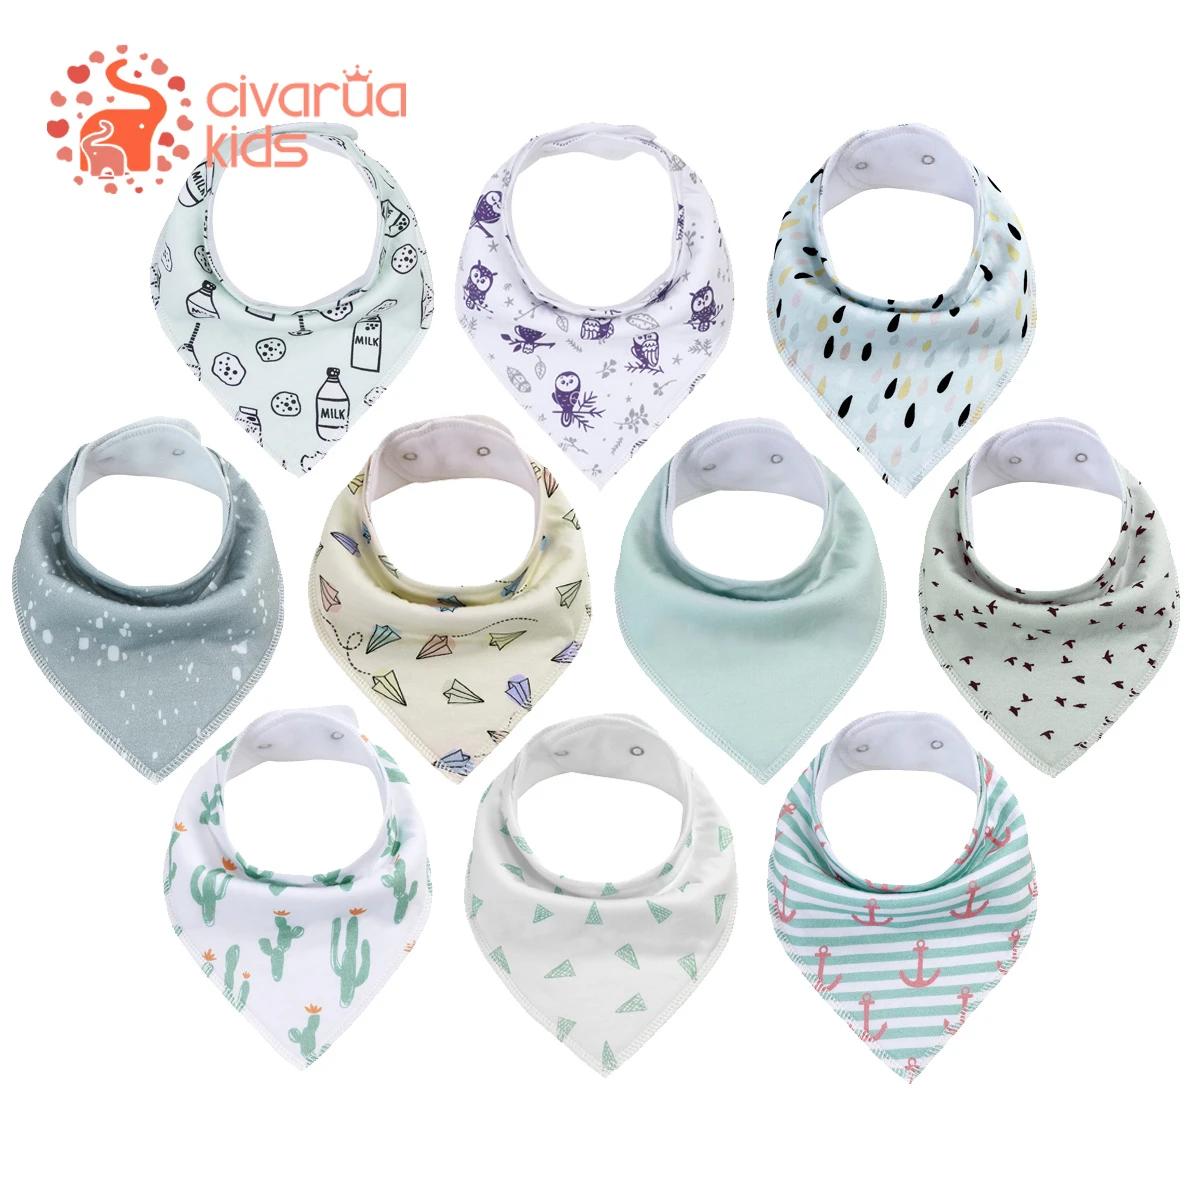 Baby Accessories best of sale 100% Organic Cotton Baby Bandana Bibs Baby Bibs Feeding Bibs for Drooling & Teething Soft and Absorbent Bibs Unisex Infant Bibs boots baby accessories	